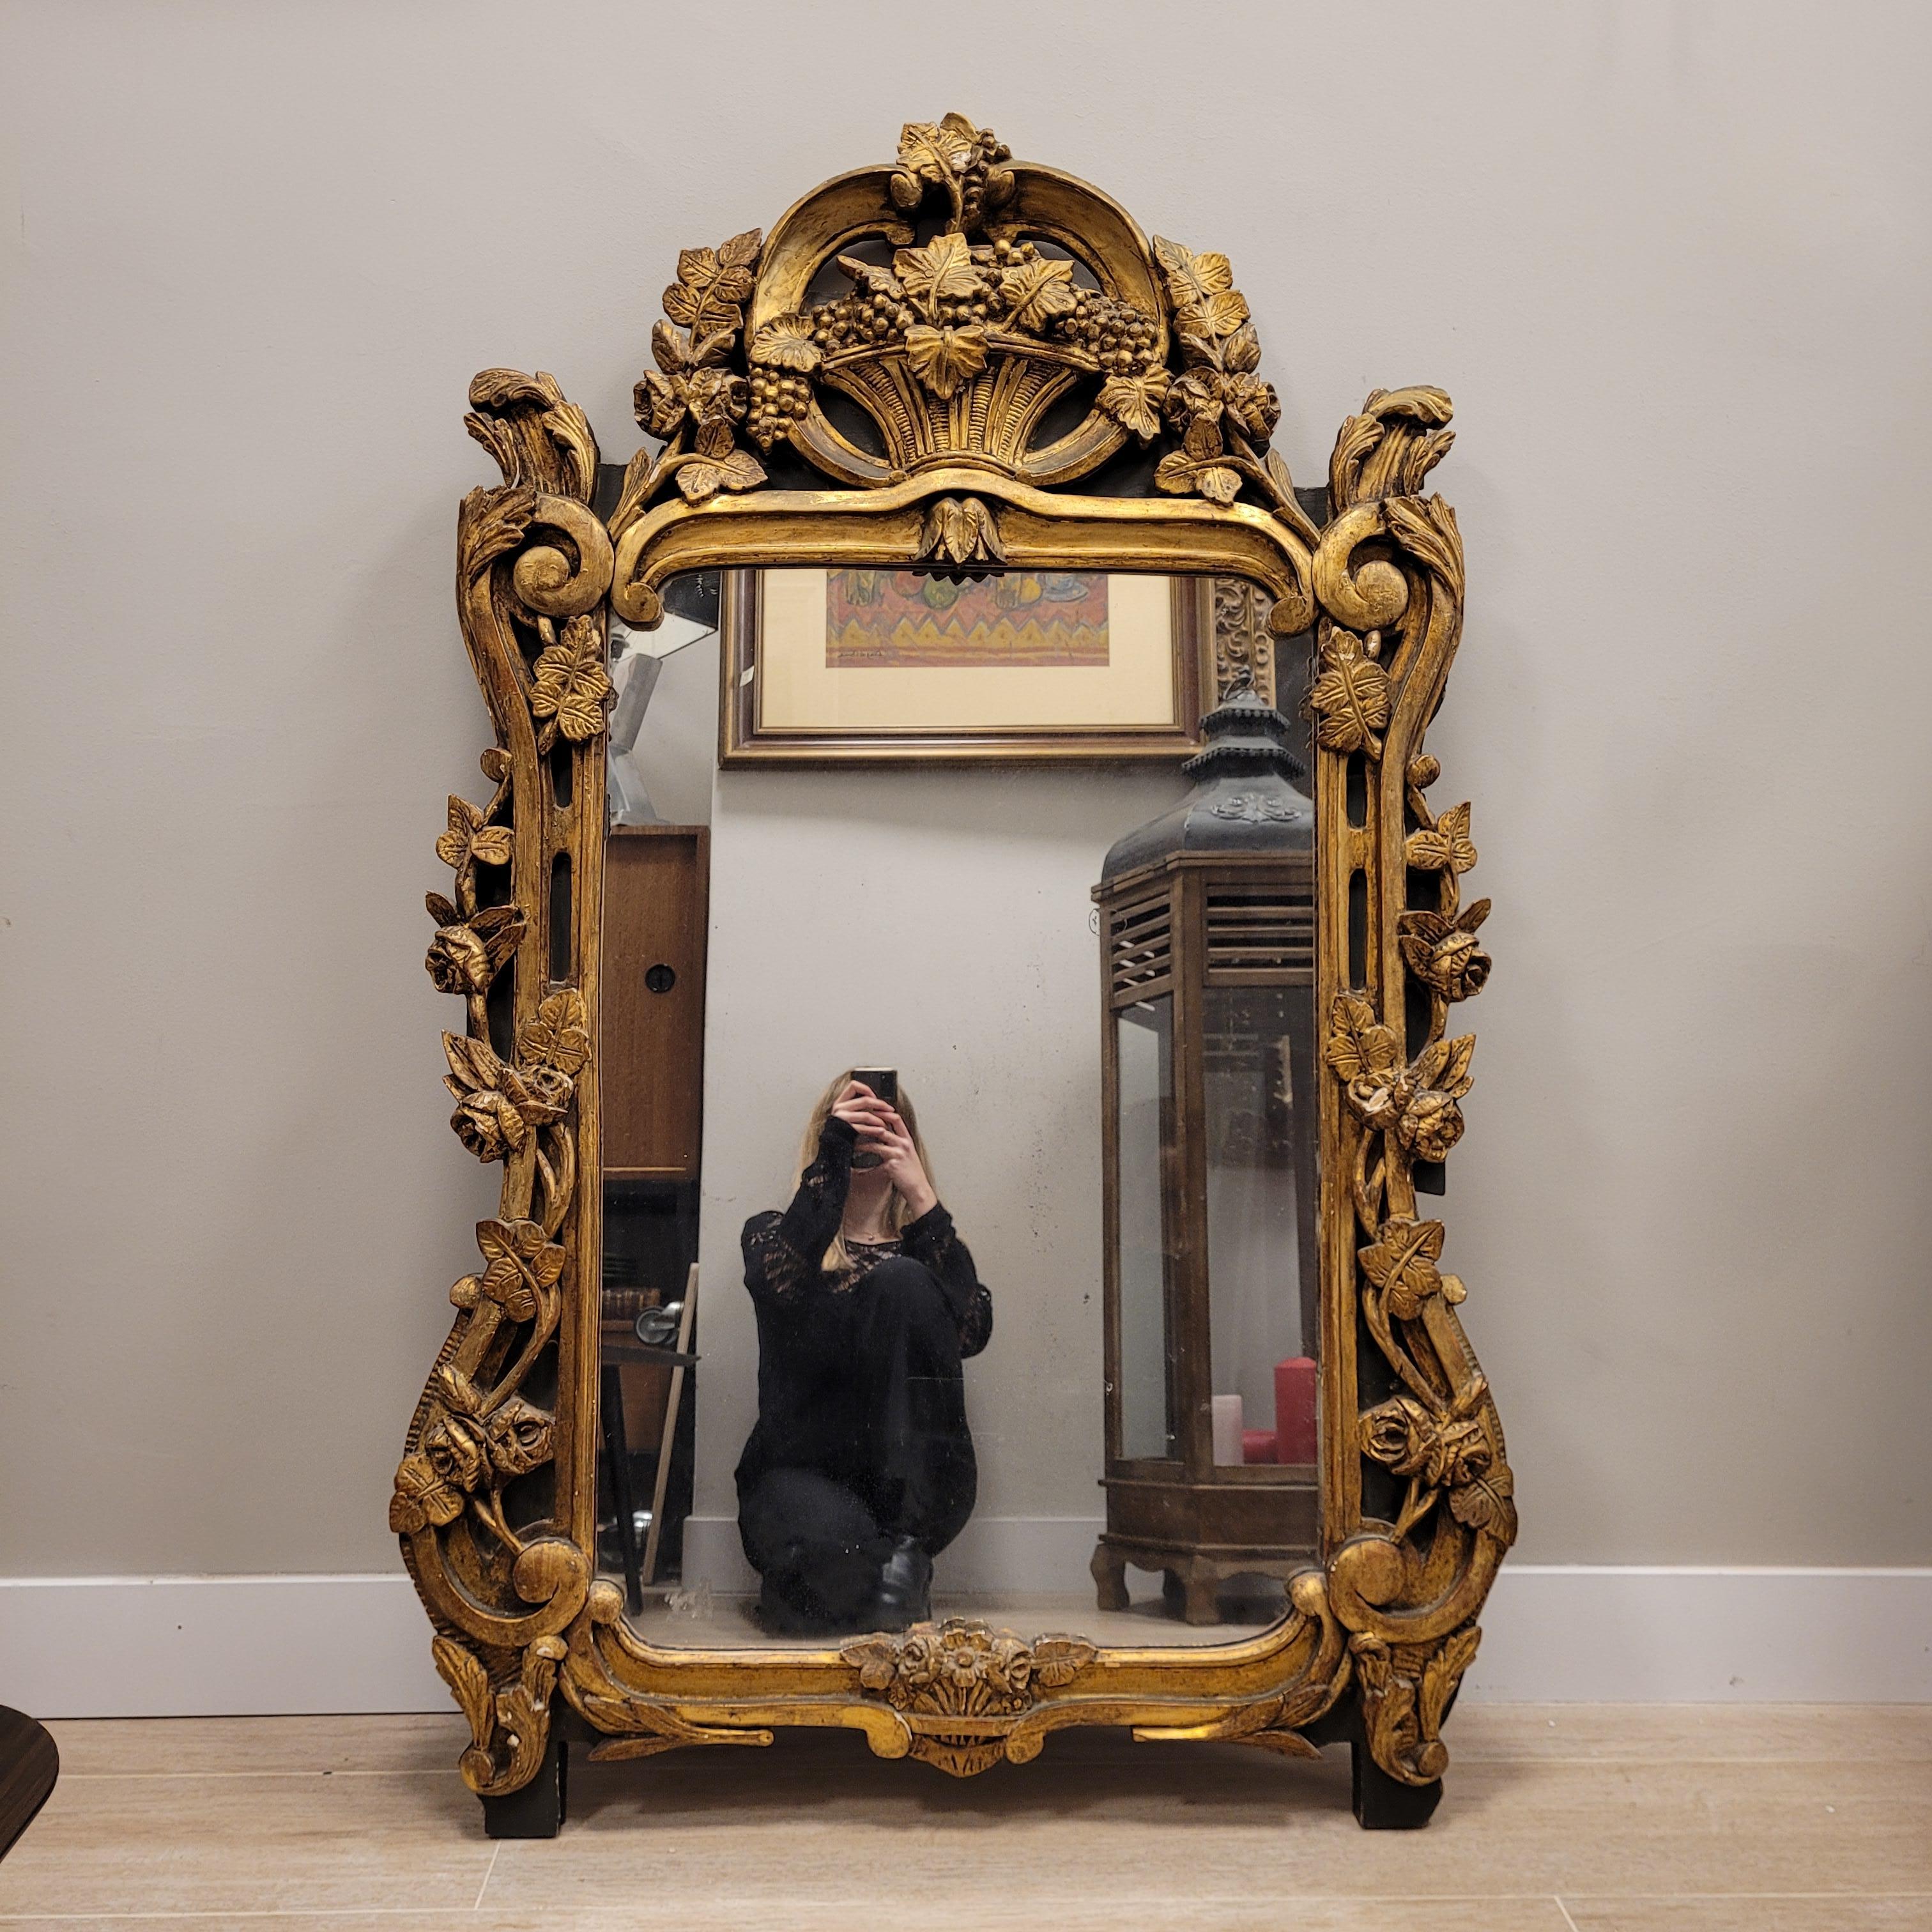 Gorgeous 

Spectacular French mirror of Regency style and era. The French Regency refers to the period after the death of Louis XIV, between September 1, 1715 and February 15, 1723, during which King Louis XV was a minor and France was governed by